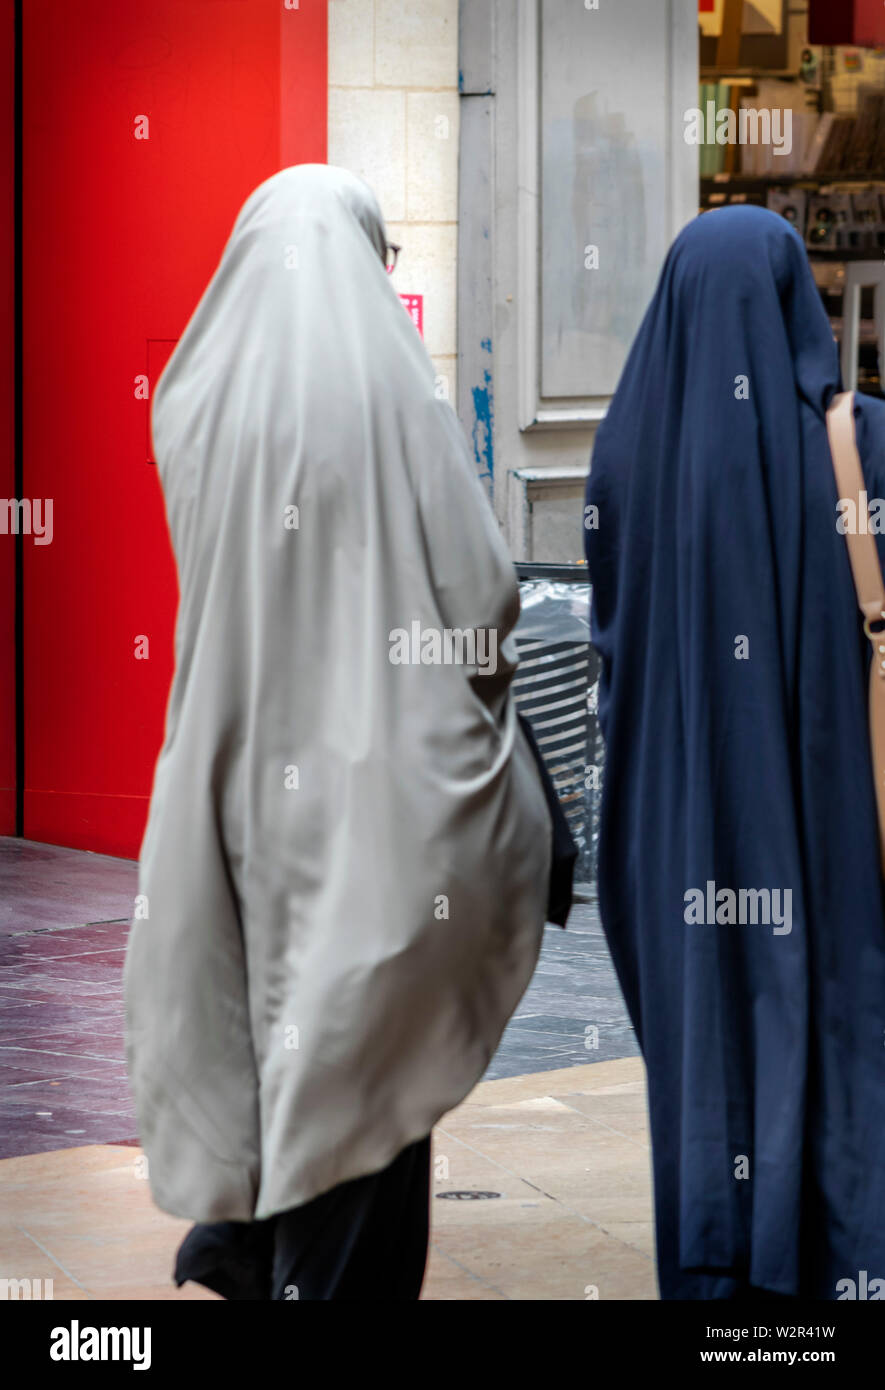 Two ladies out shopping in Bordeaux wearing religious dress Stock Photo